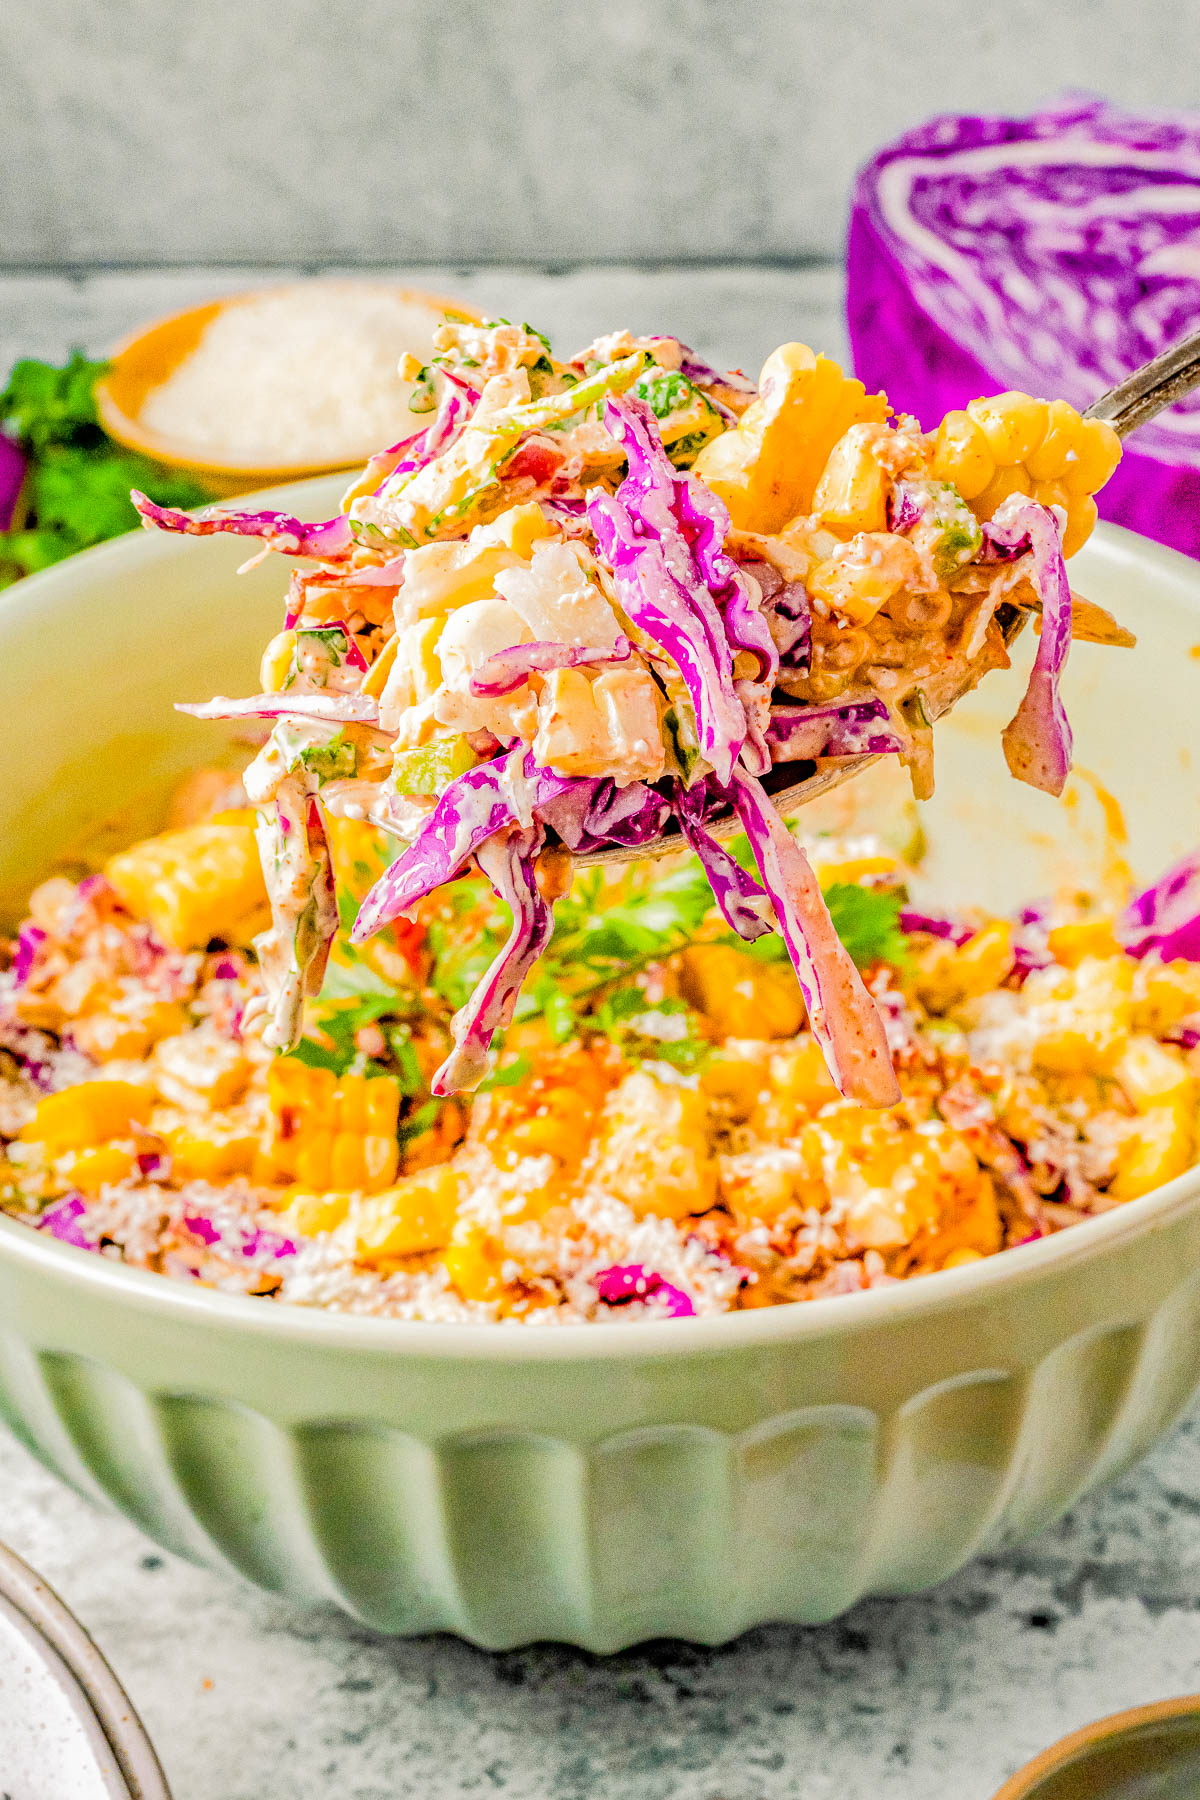 A bowl of colorful coleslaw with shredded purple cabbage, carrots, and a creamy dressing, served on a rustic table.